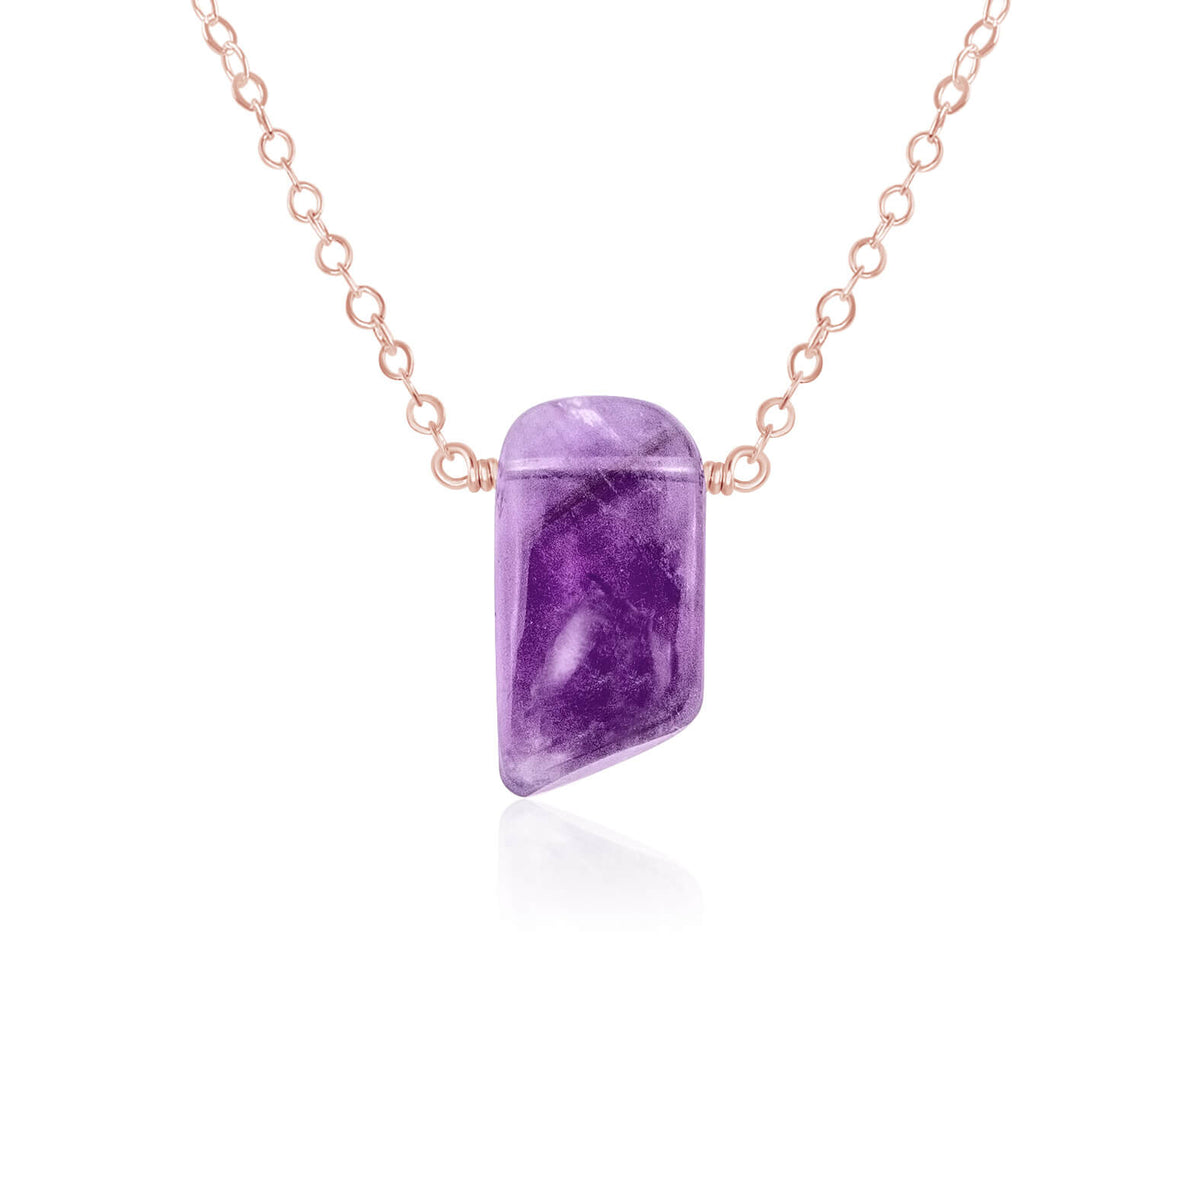 Small Smooth Slab Point Necklace - Amethyst - 14K Rose Gold Fill - Luna Tide Handmade Jewellery